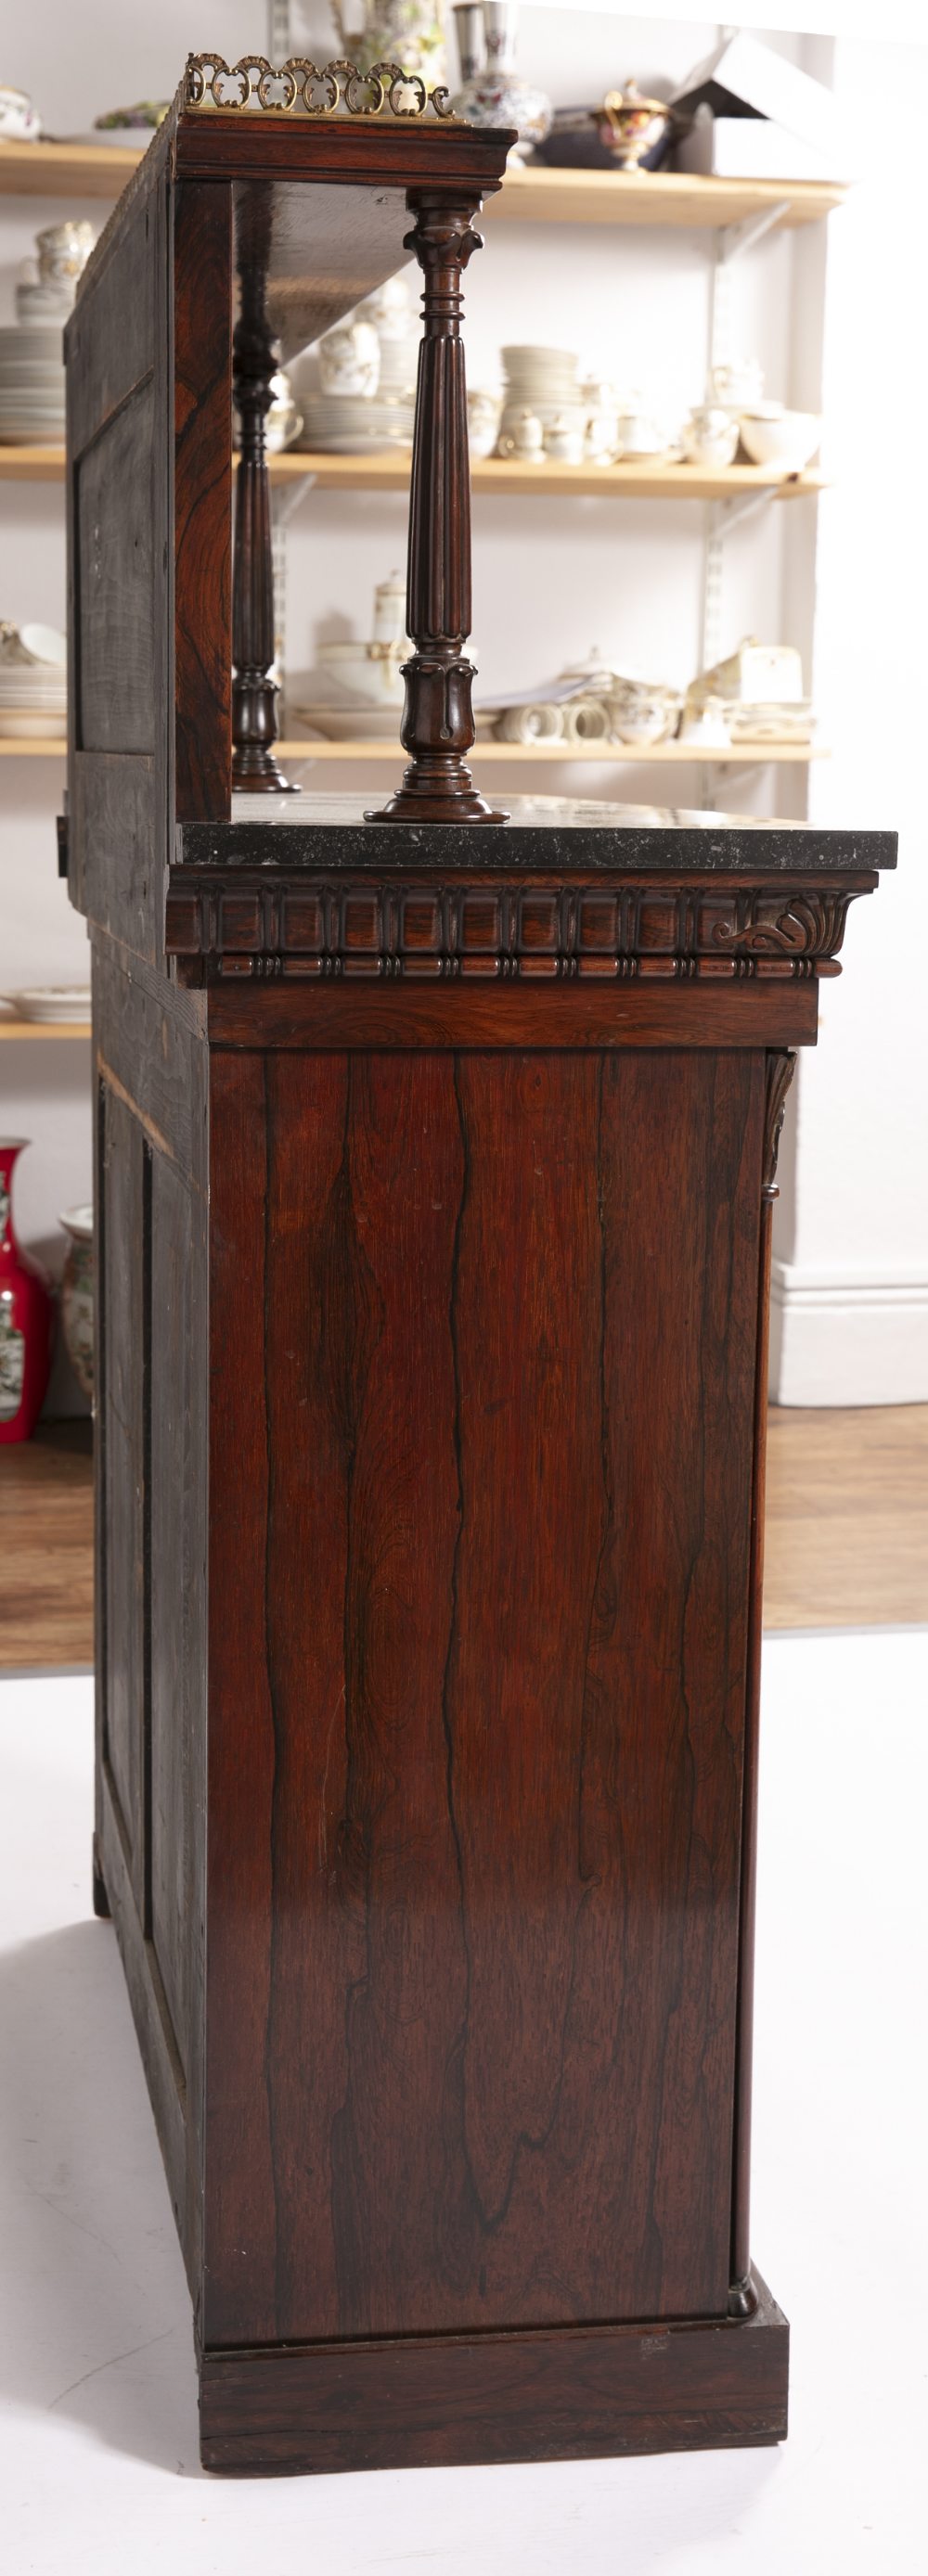 Rosewood chiffonier Regency, with gilt metal rail to the raised back, marble top and panel doors - Image 3 of 4